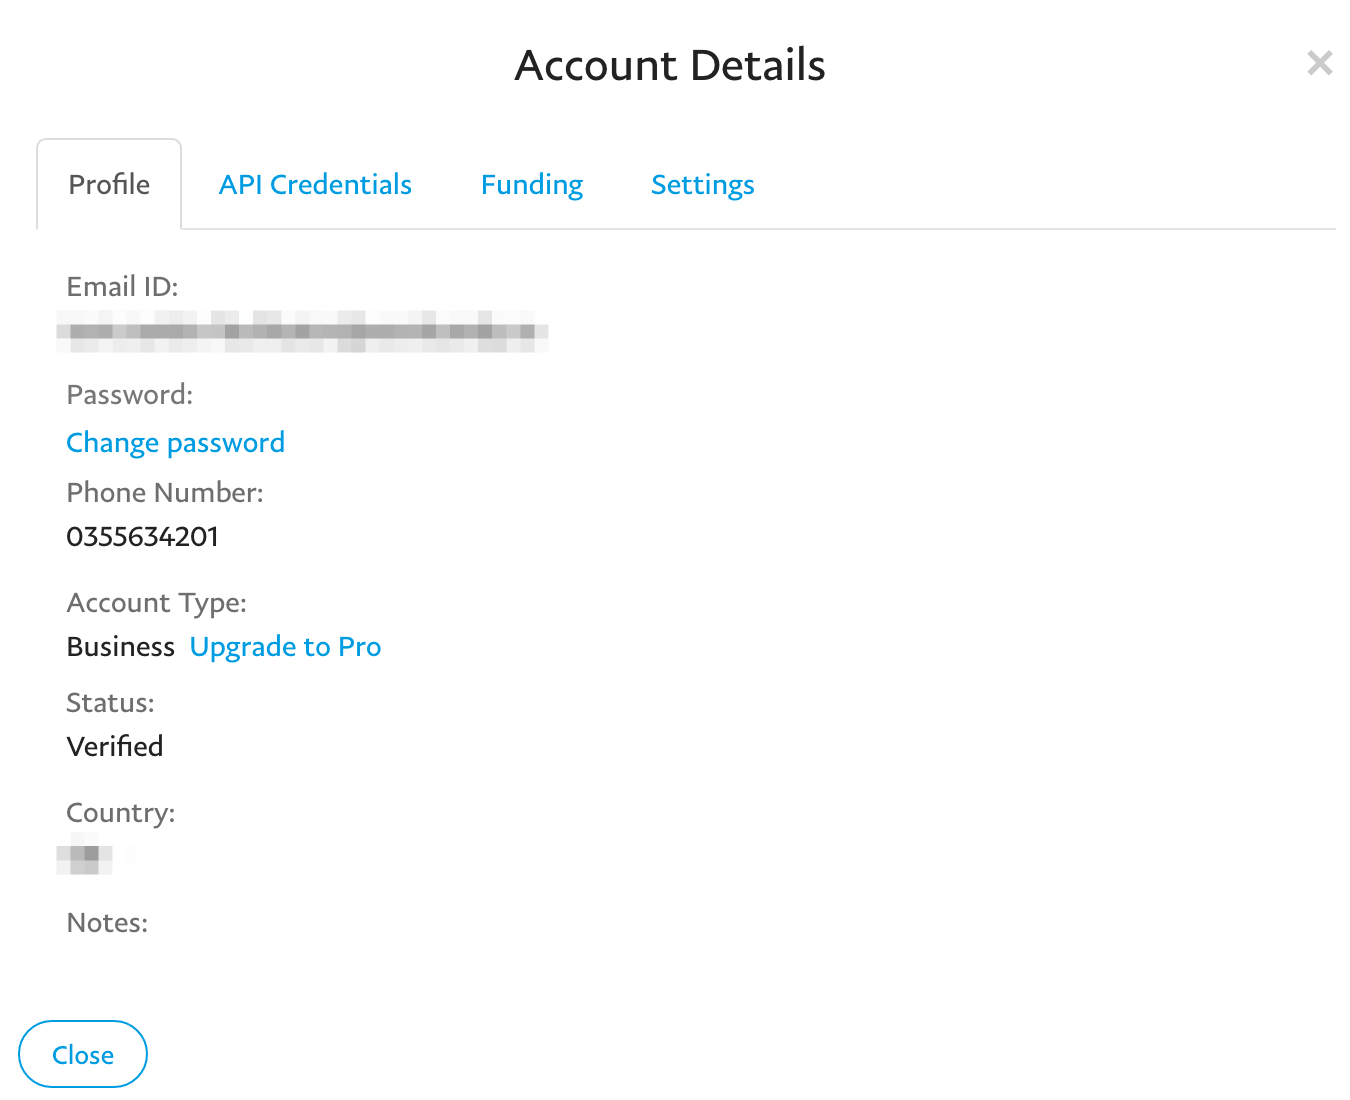 The Account Details modal popup.